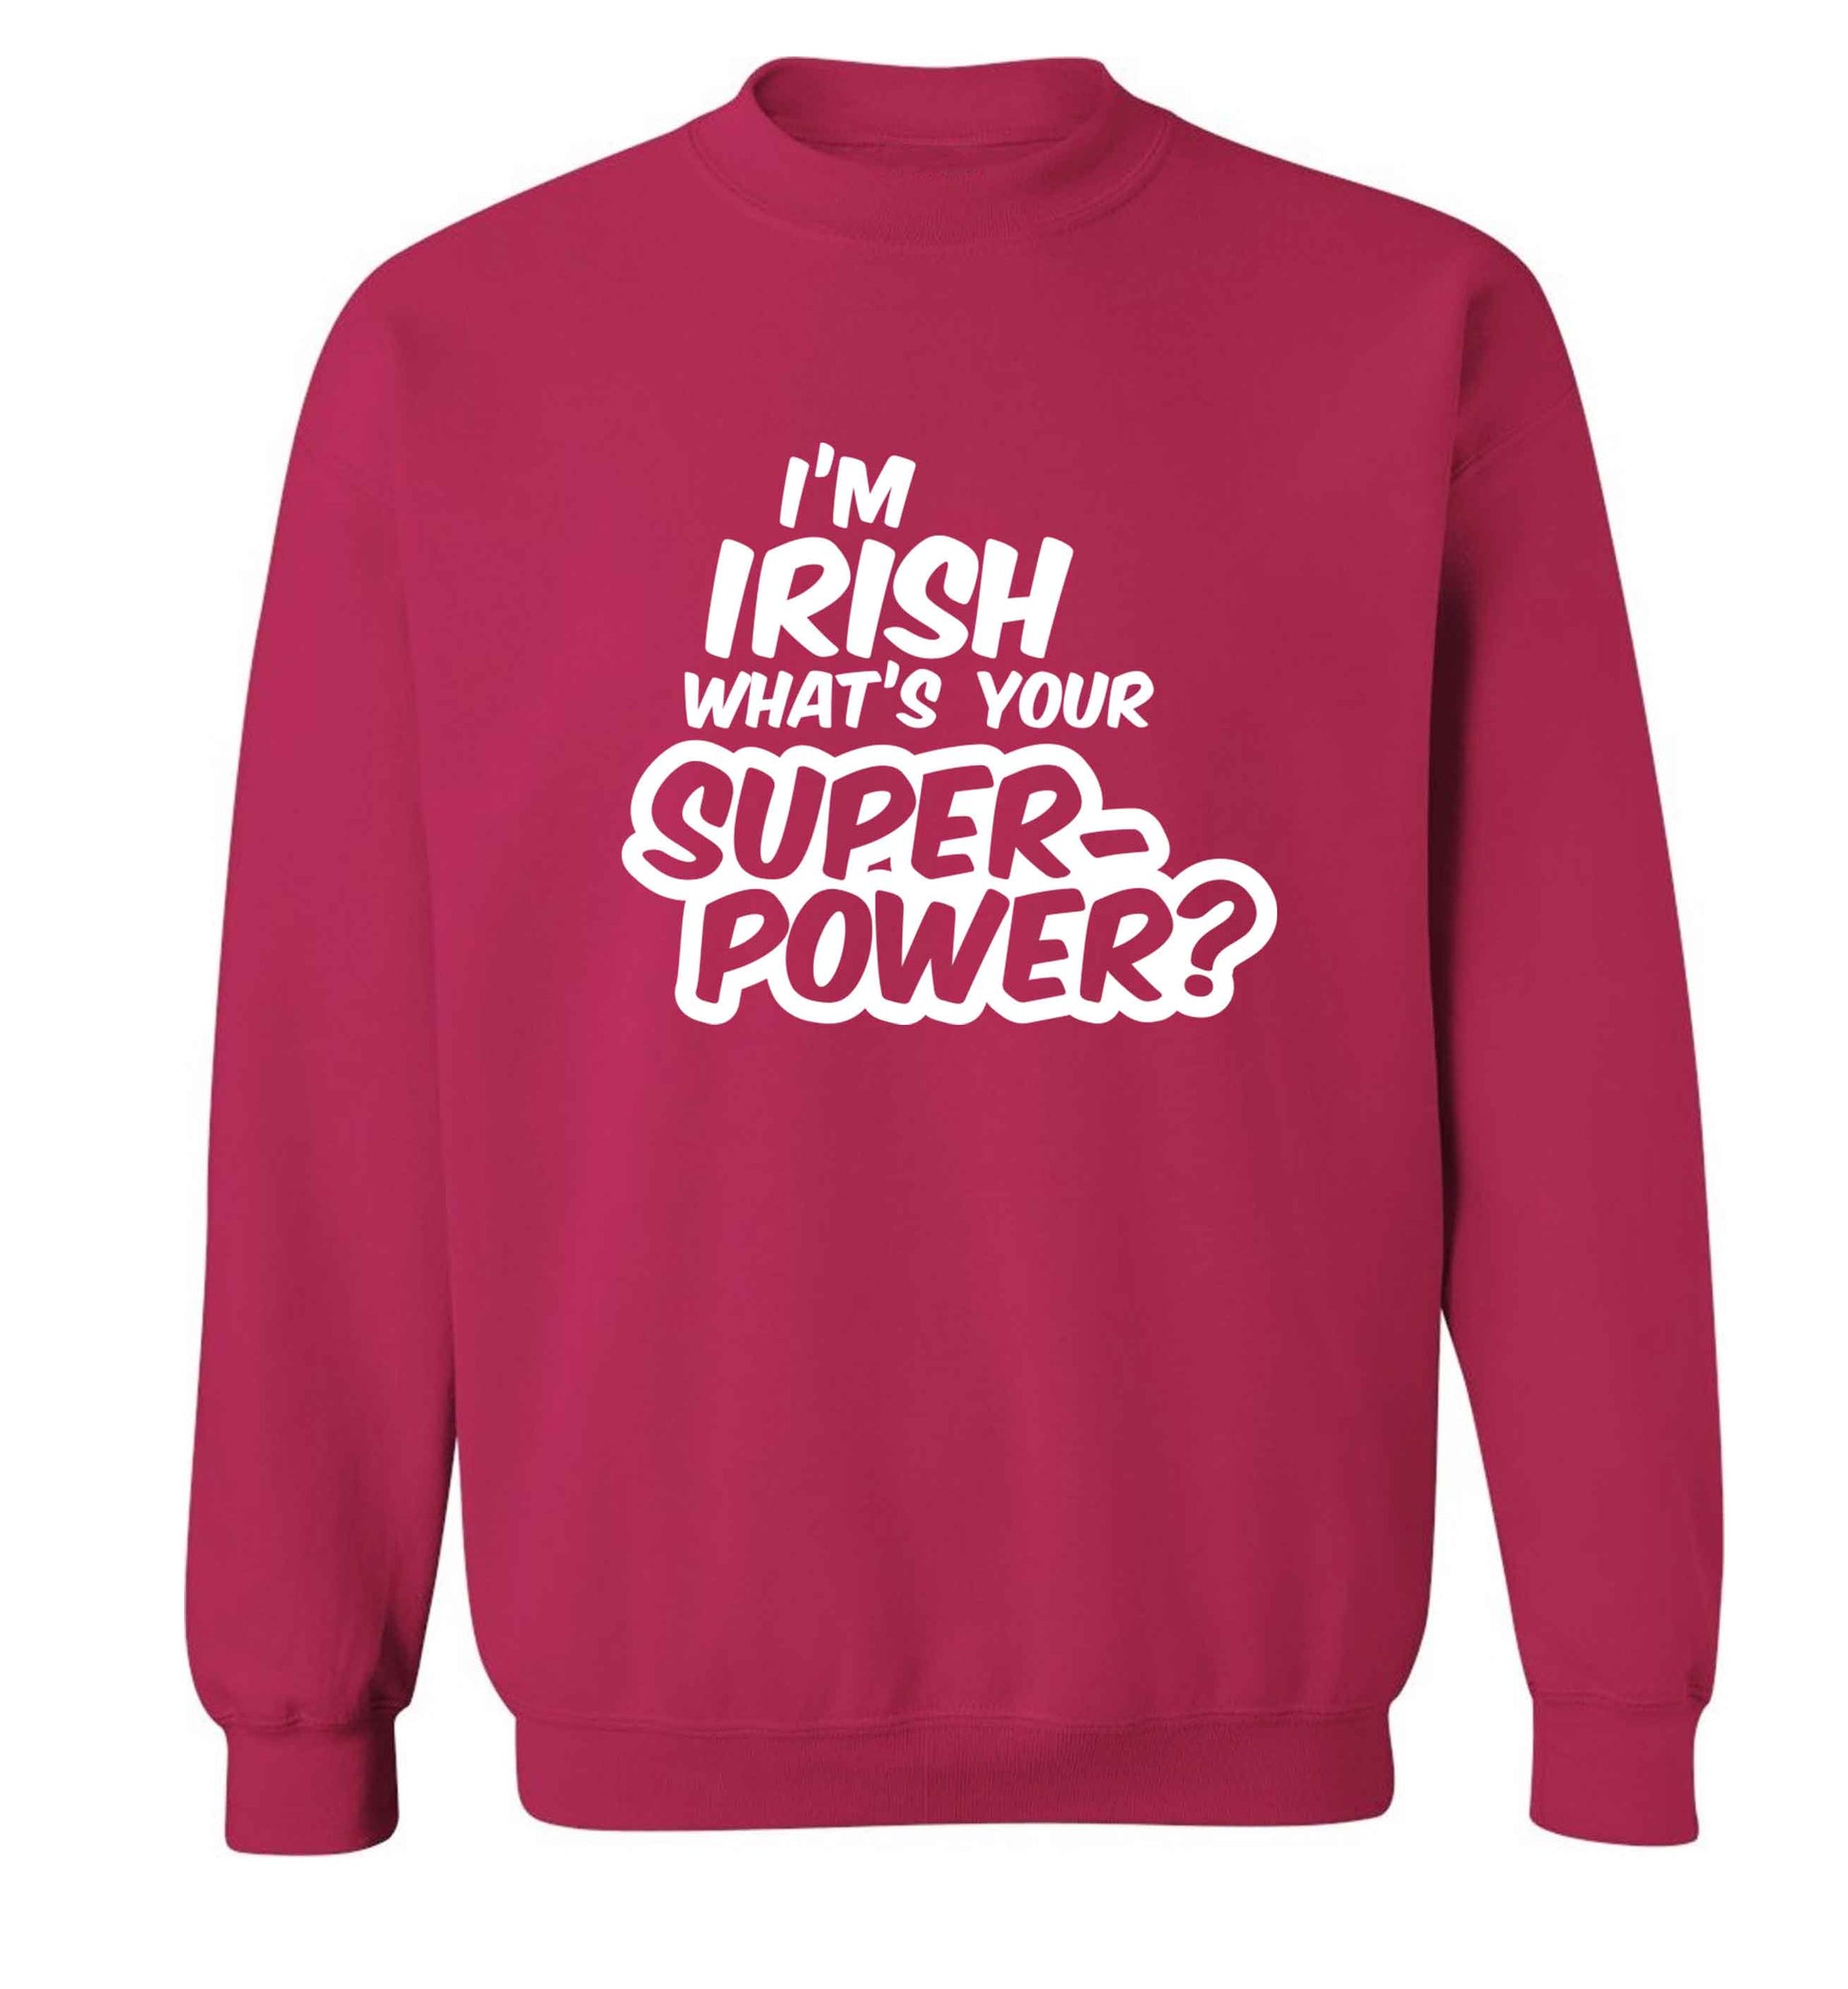 I'm Irish what's your superpower? adult's unisex pink sweater 2XL